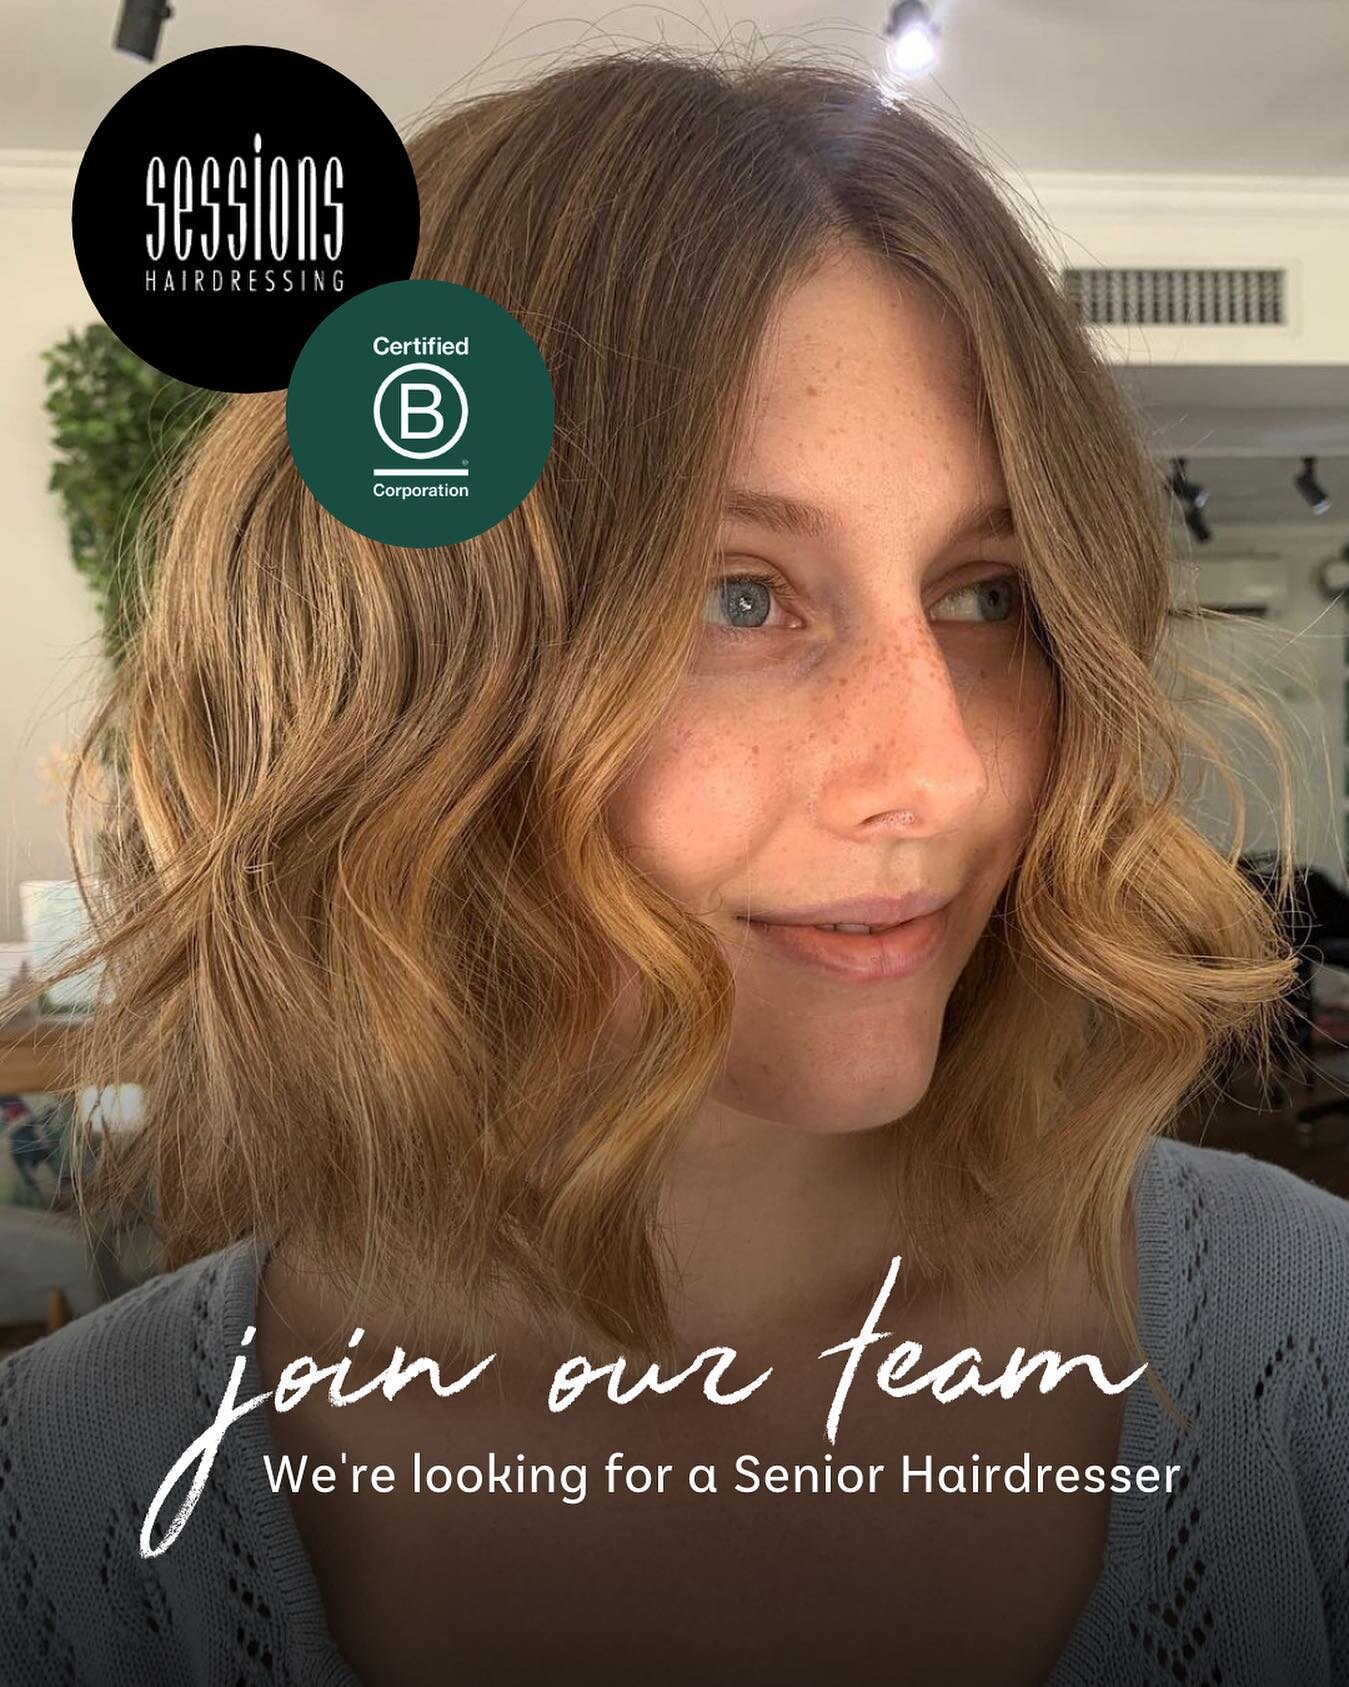 Join our growing team! Work in a vibrant busy salon that balances profit and purpose through conscious operation 🌍 

Sessions is a certified BCorp which means what we do in salon has purpose and benefits planet and people 🌼

We believe in:
Work/lif